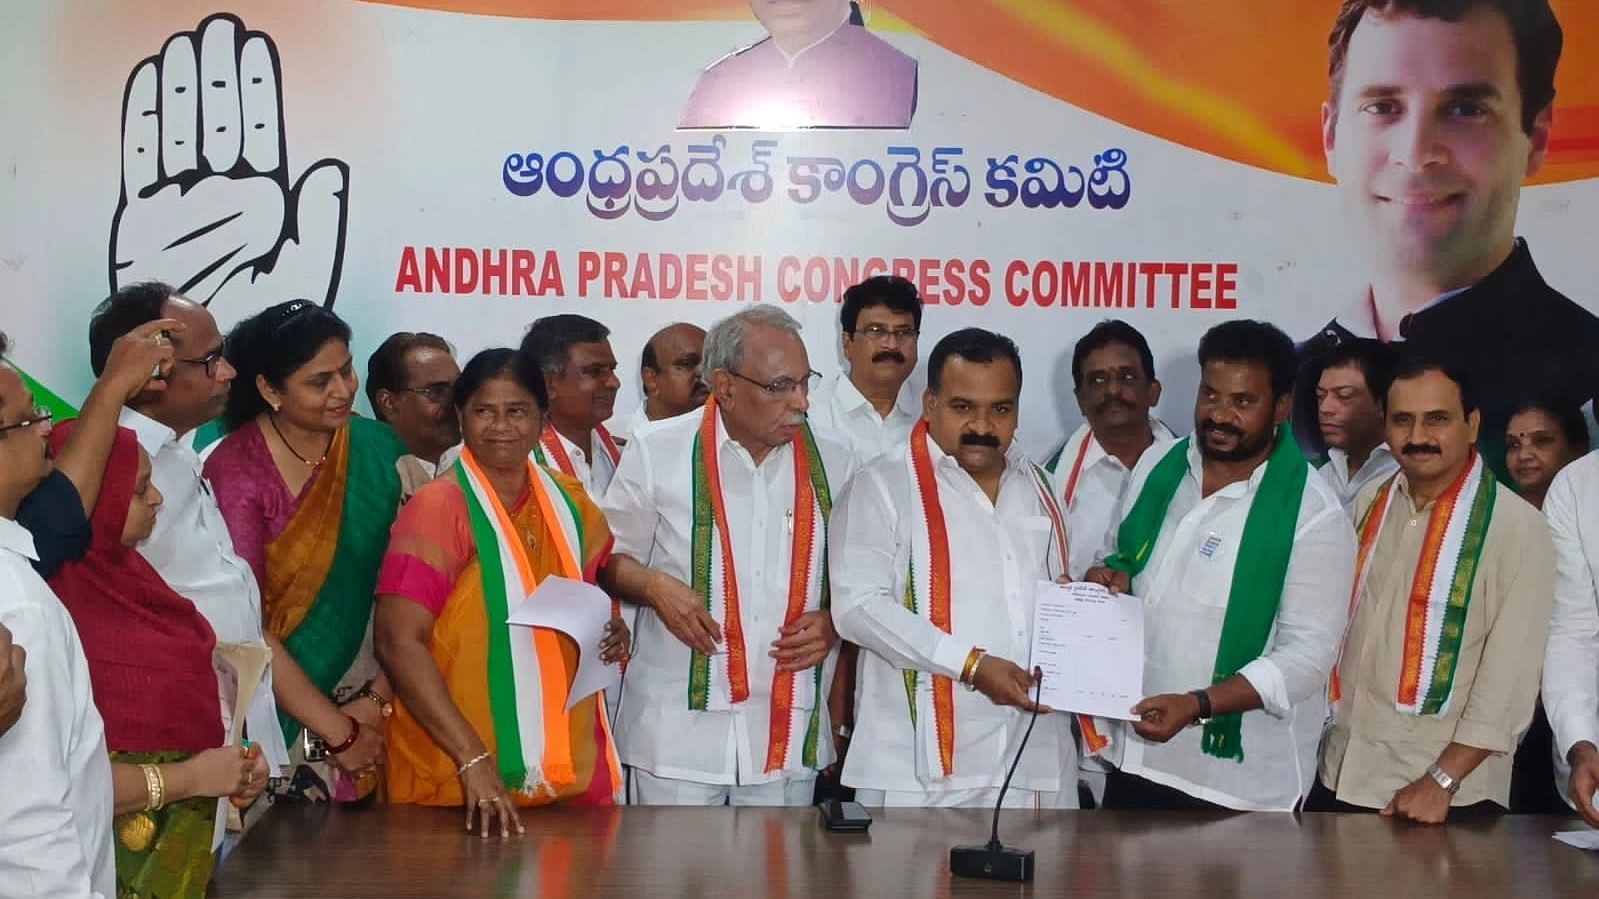 <div class="paragraphs"><p>Manickam Tagore launches the donation drive in Andhra Pradesh.</p></div>